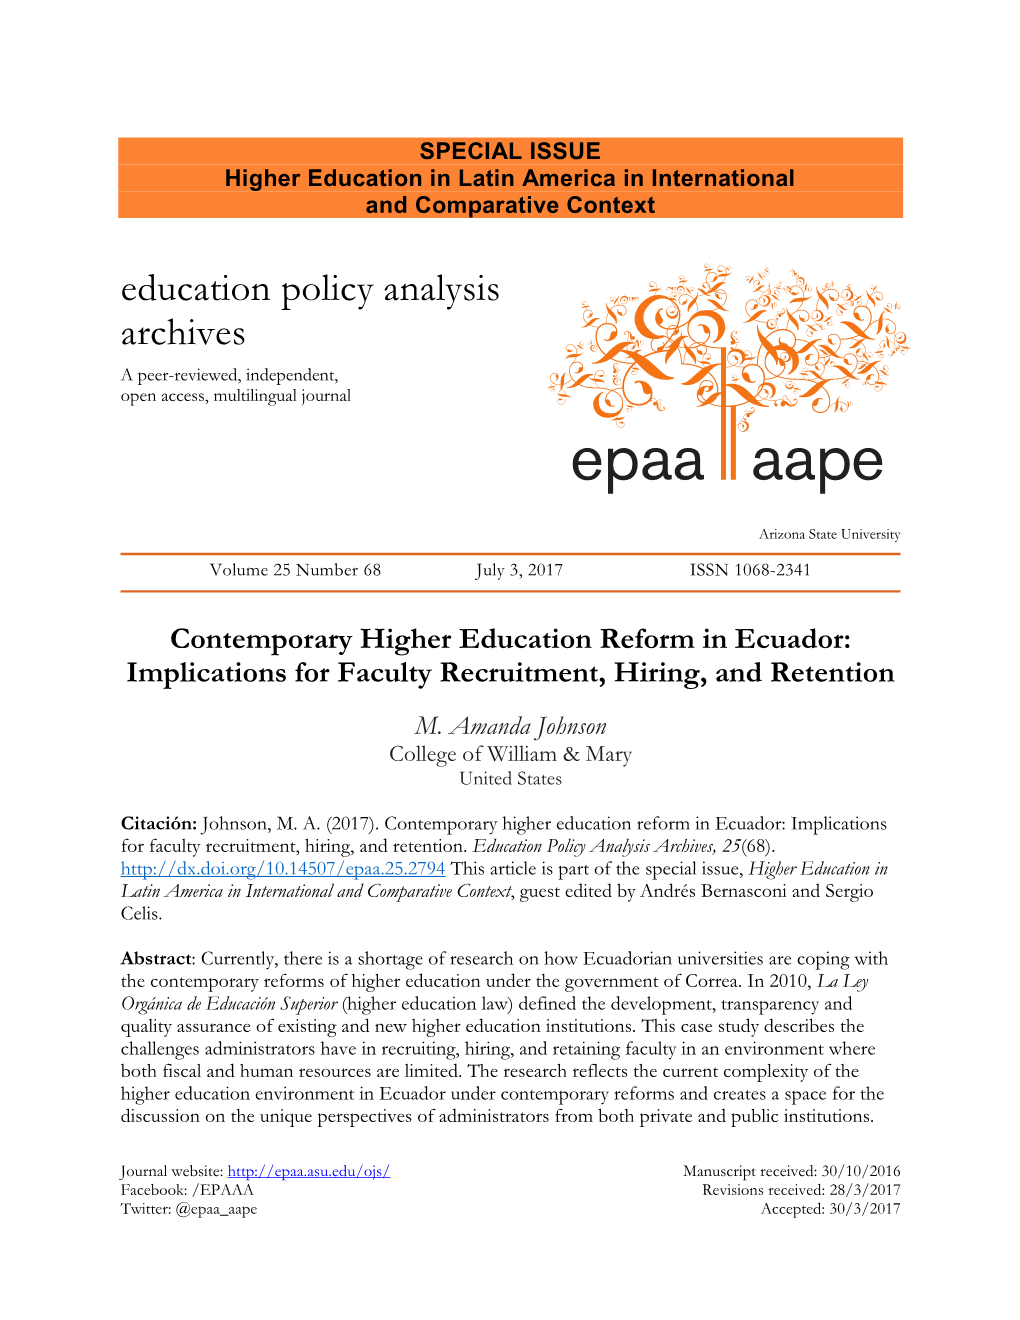 Contemporary Higher Education Reform in Ecuador: Implications for Faculty Recruitment, Hiring, and Retention